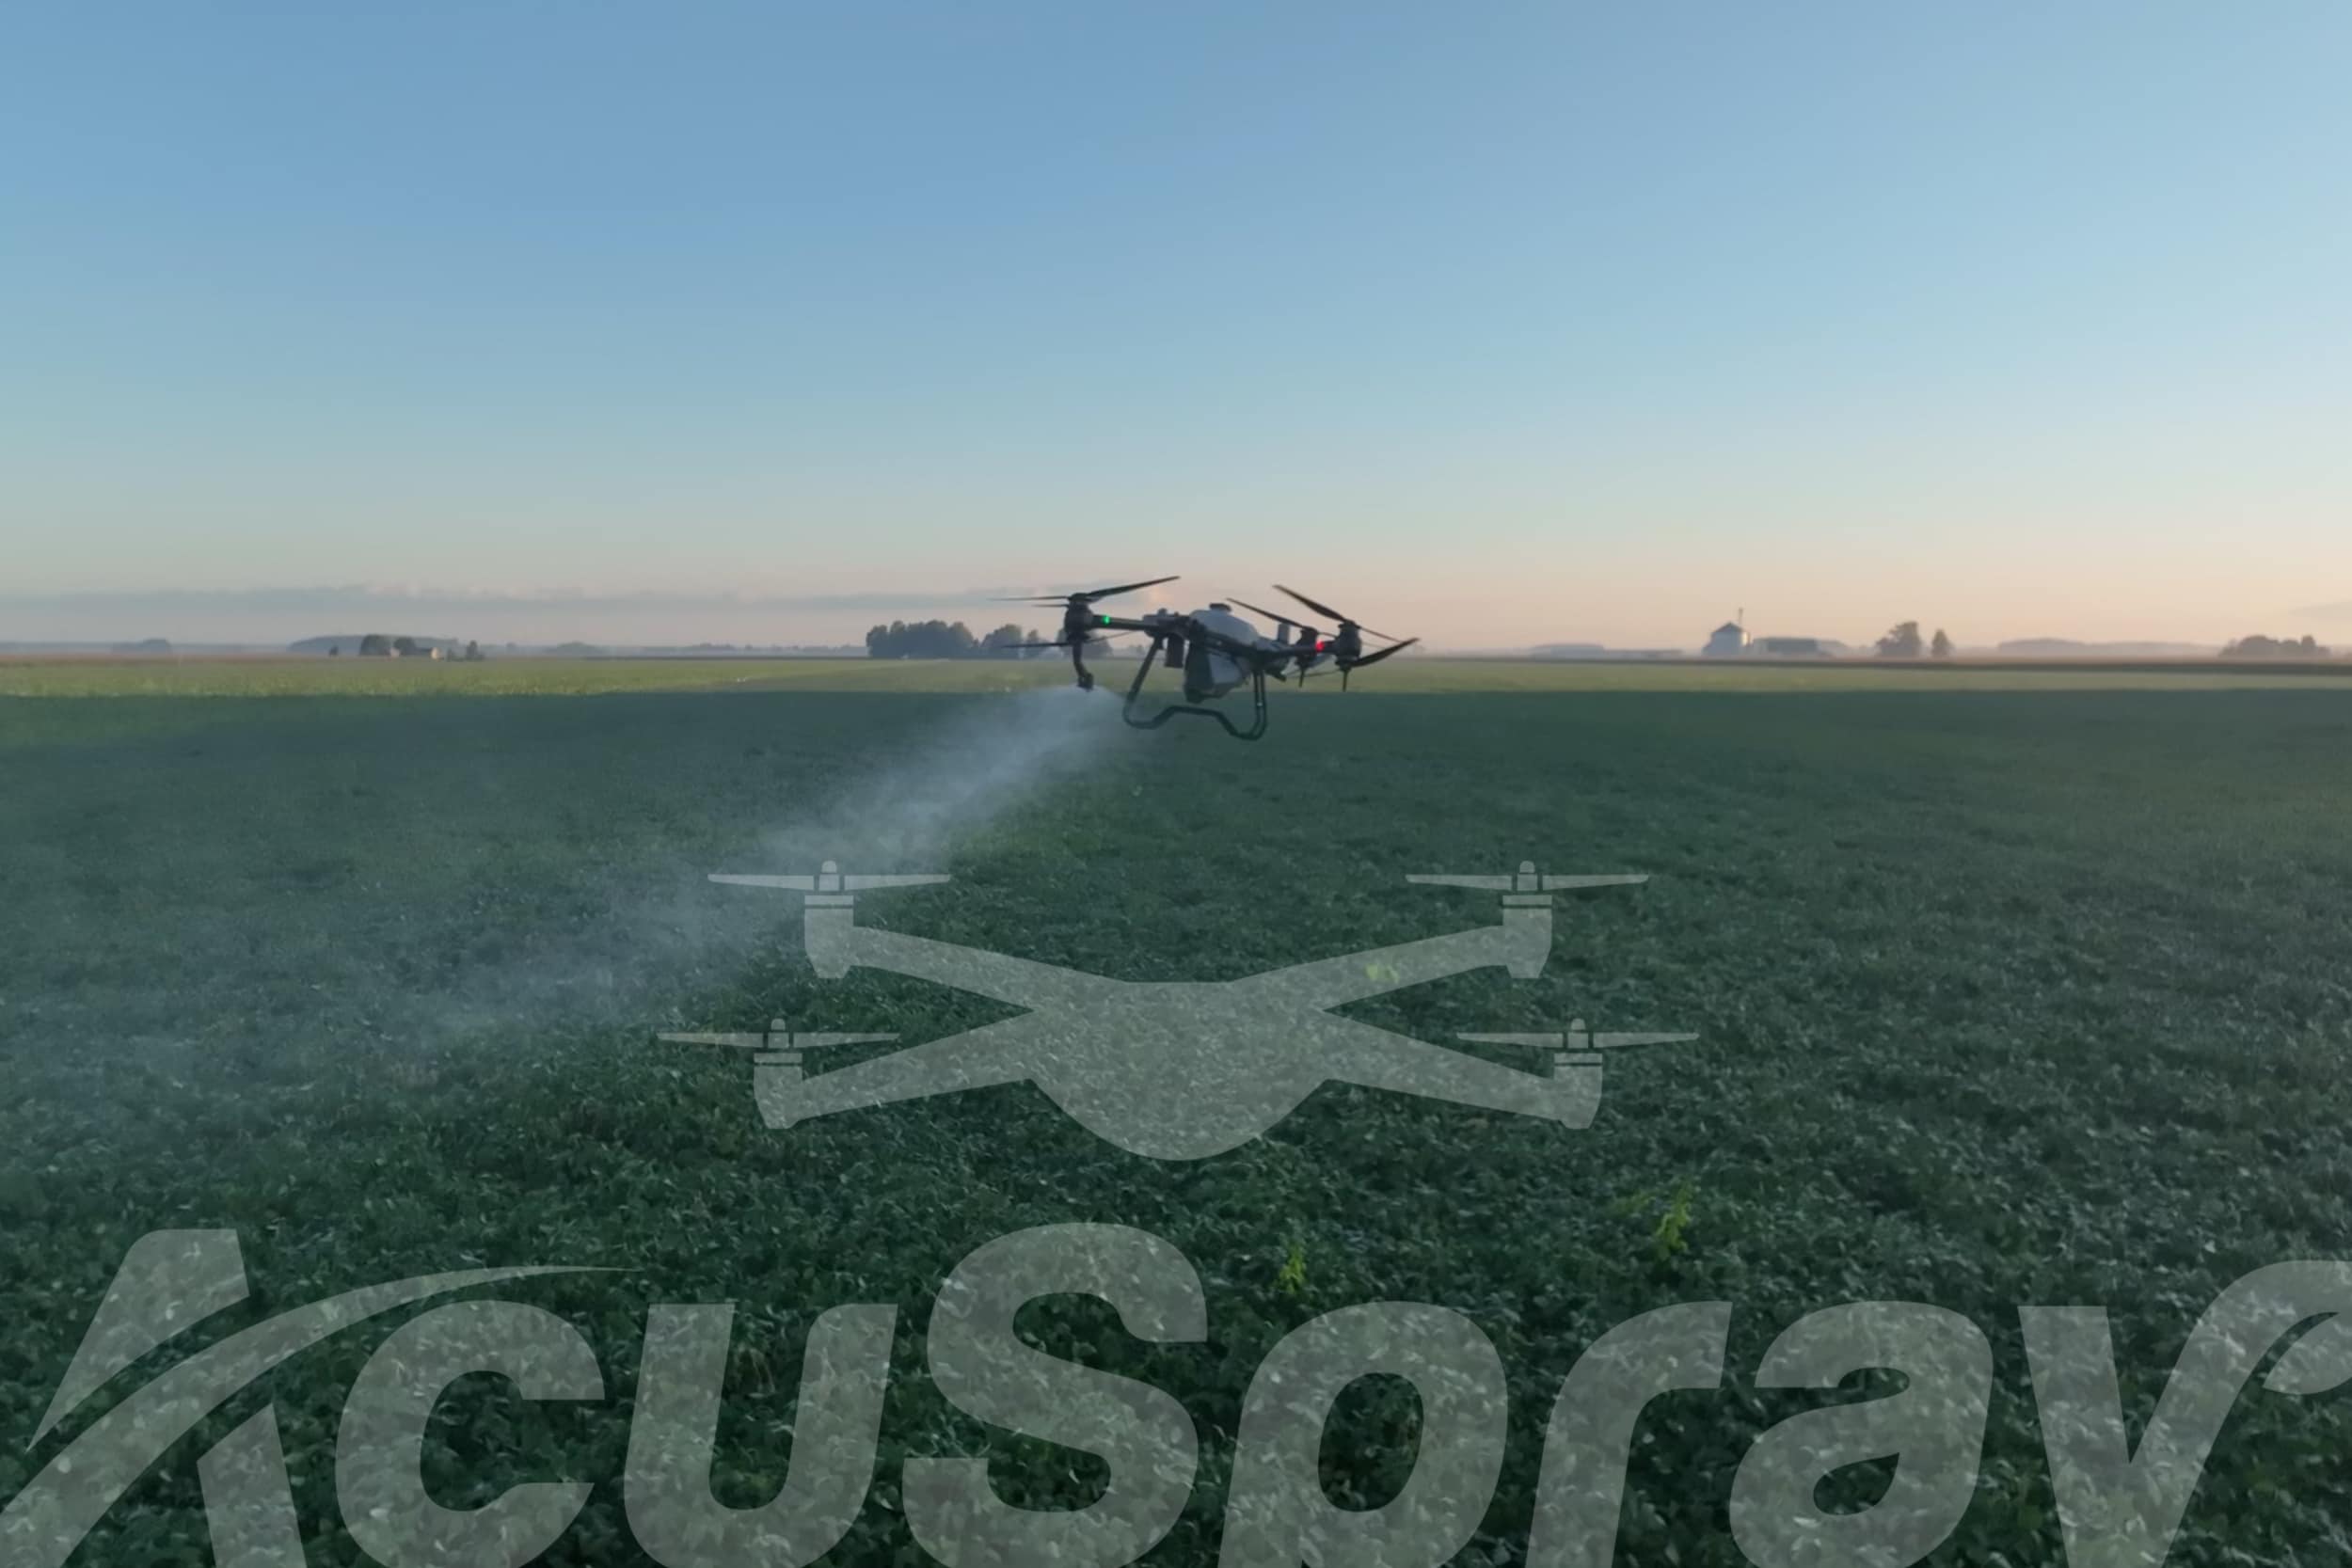 Spray drone efficiently applying fungicide over a lush soybean field.